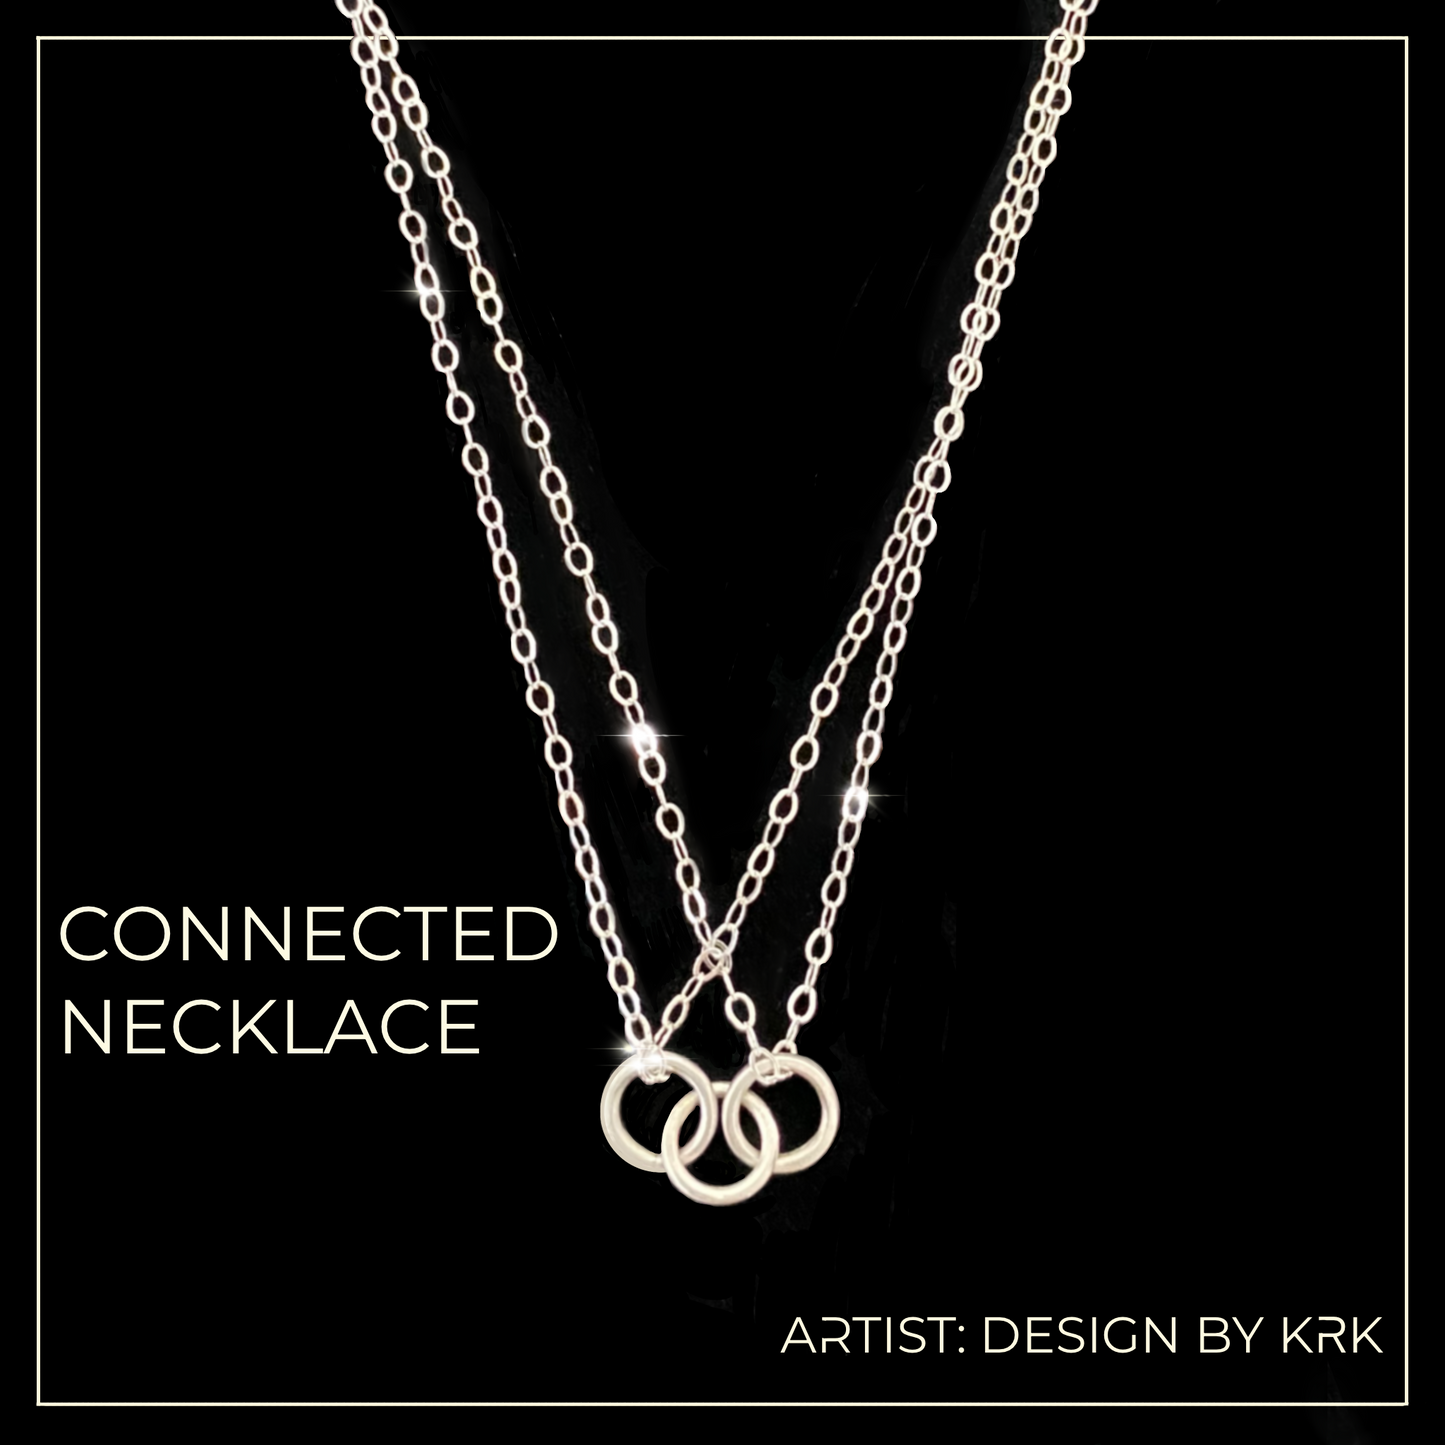 Connected Necklace by Design by KRK